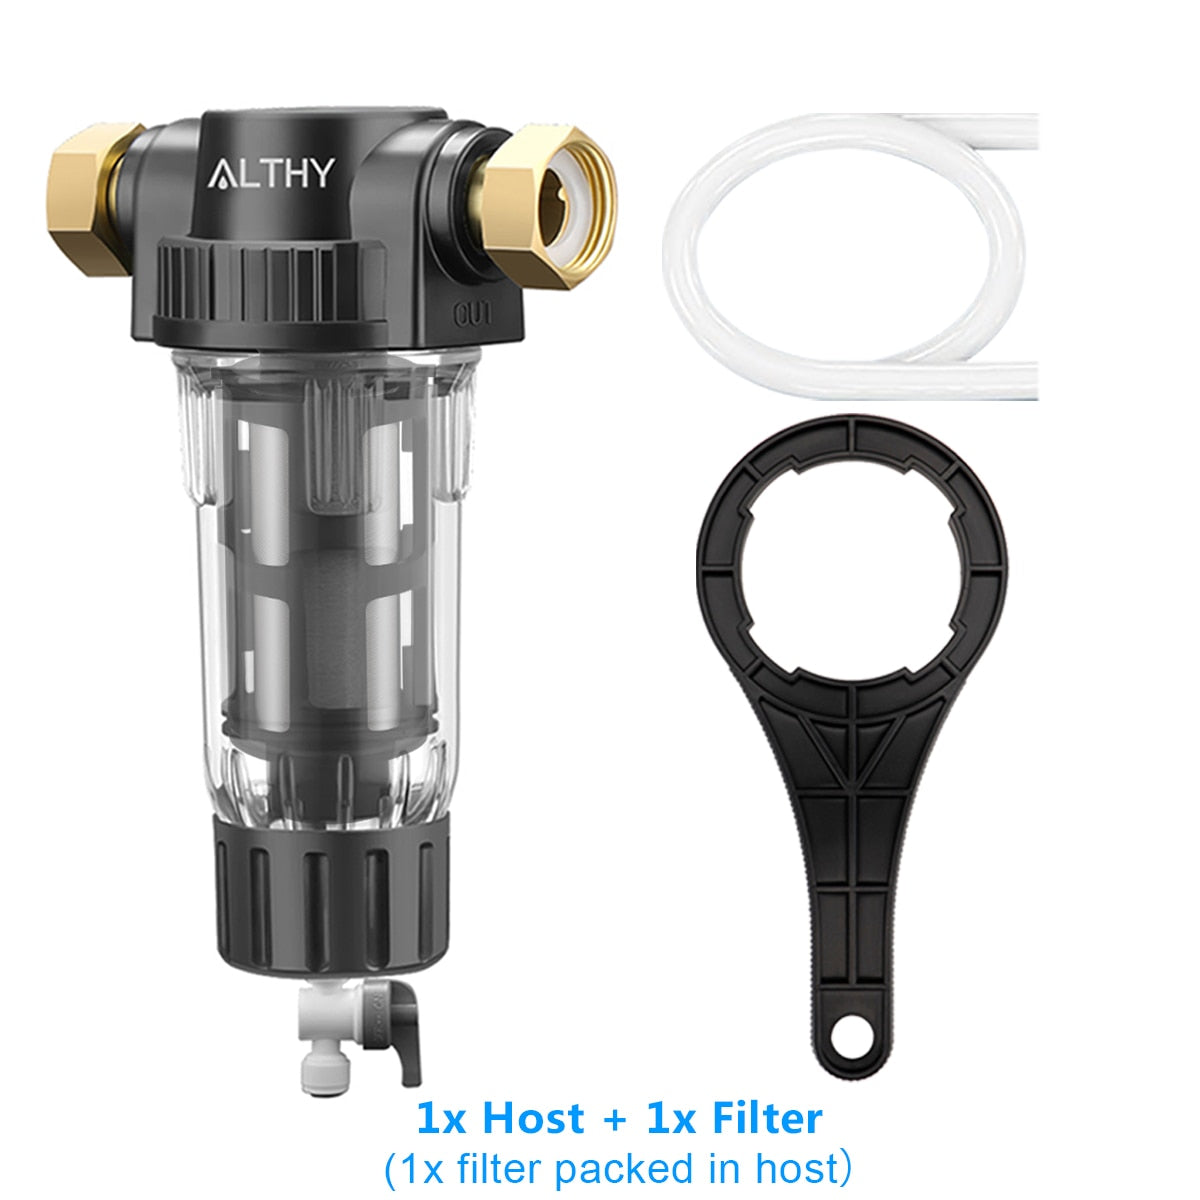 ALTHY Pre filter Whole House Spin Down Sediment Water Filter Central Prefilter Purifier System Backwash Stainless Steel Mesh Hostand1xFilterChina Hardware > Plumbing > Water Dispensing & Filtration 132.99 EZYSELLA SHOP